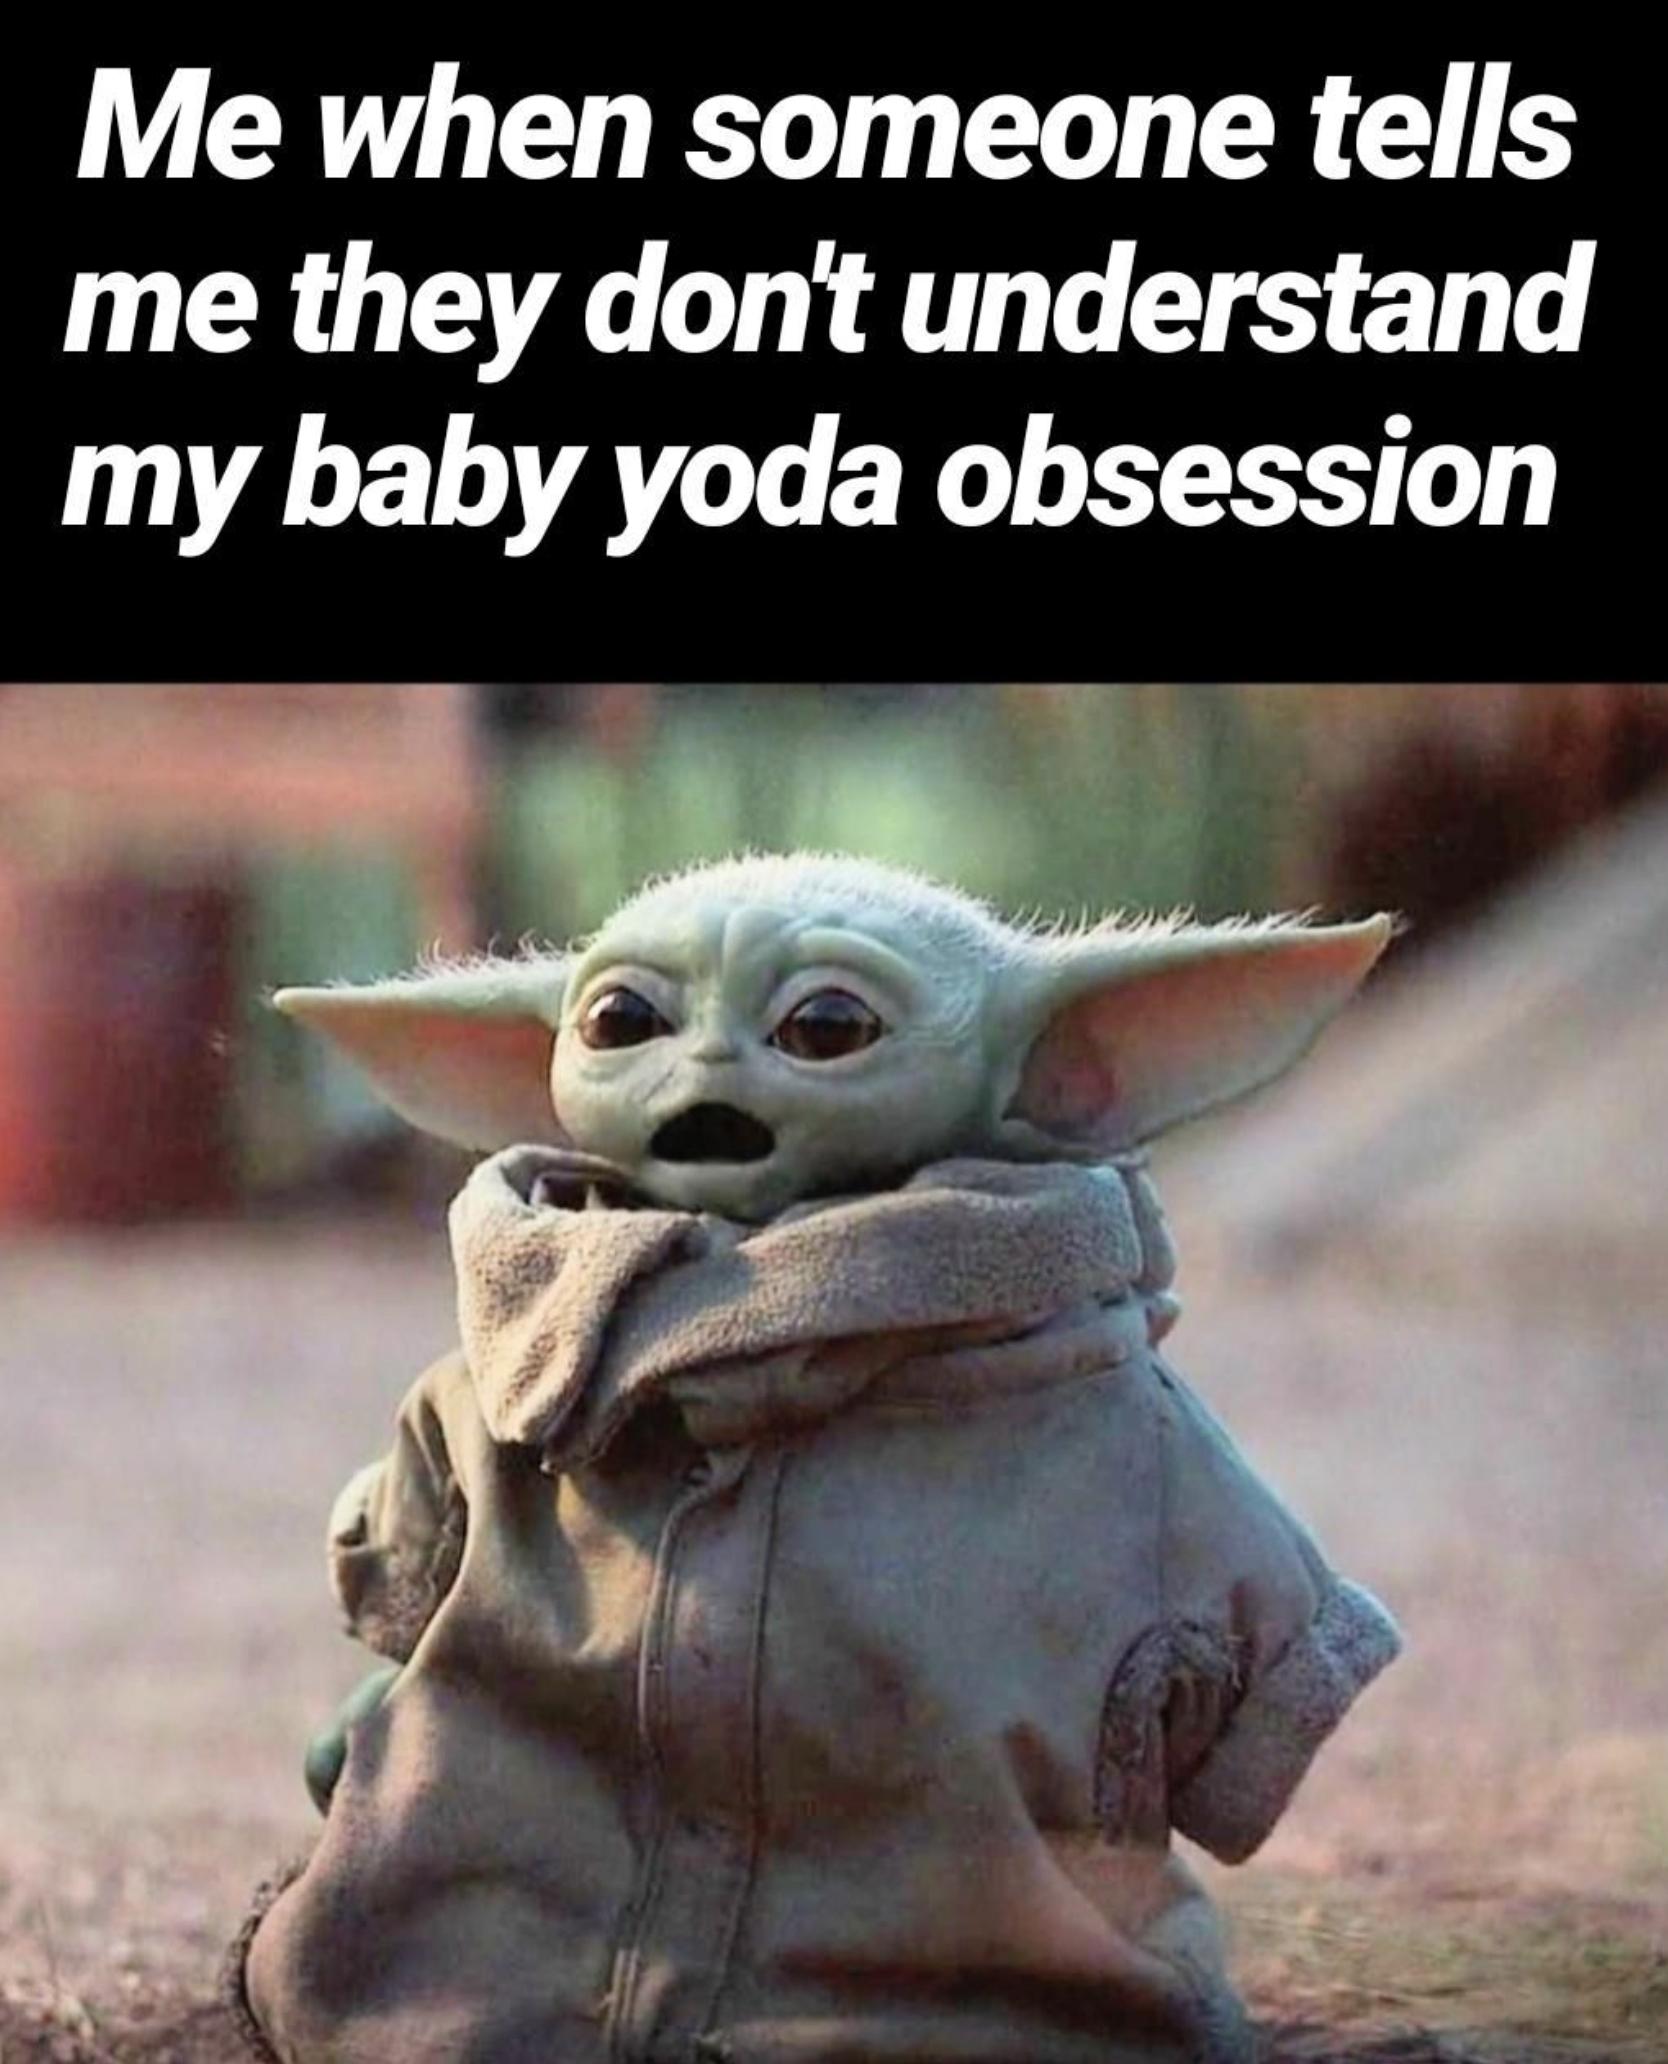 More Baby Yoda Memes! Just Because... - Live One Good Life